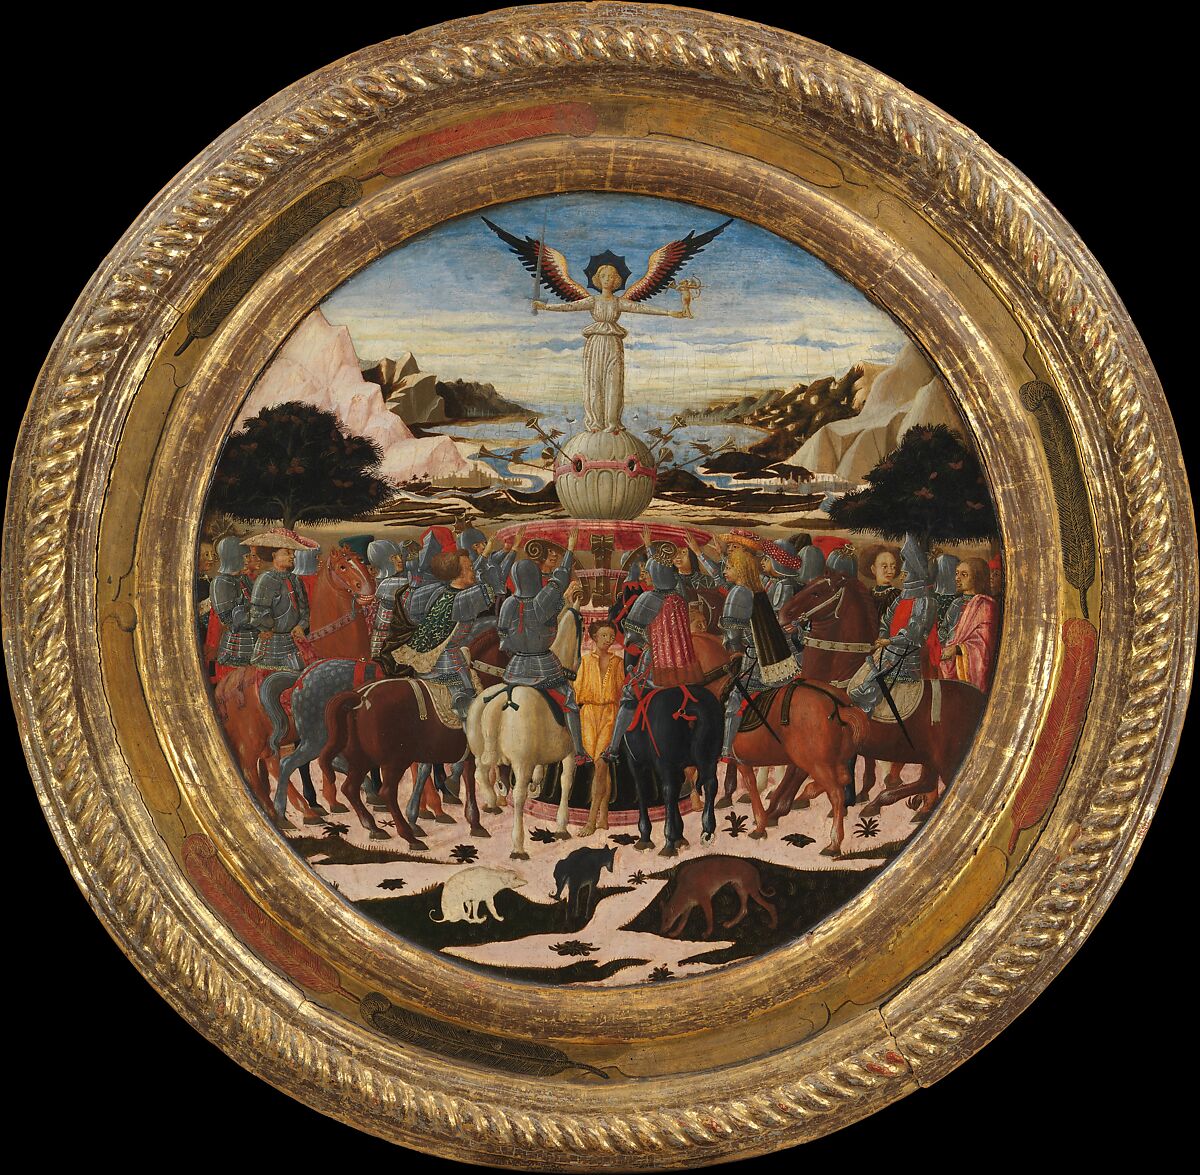 The Triumph of Fame; (reverse) Impresa of the Medici Family and Arms of the Medici and Tornabuoni Families